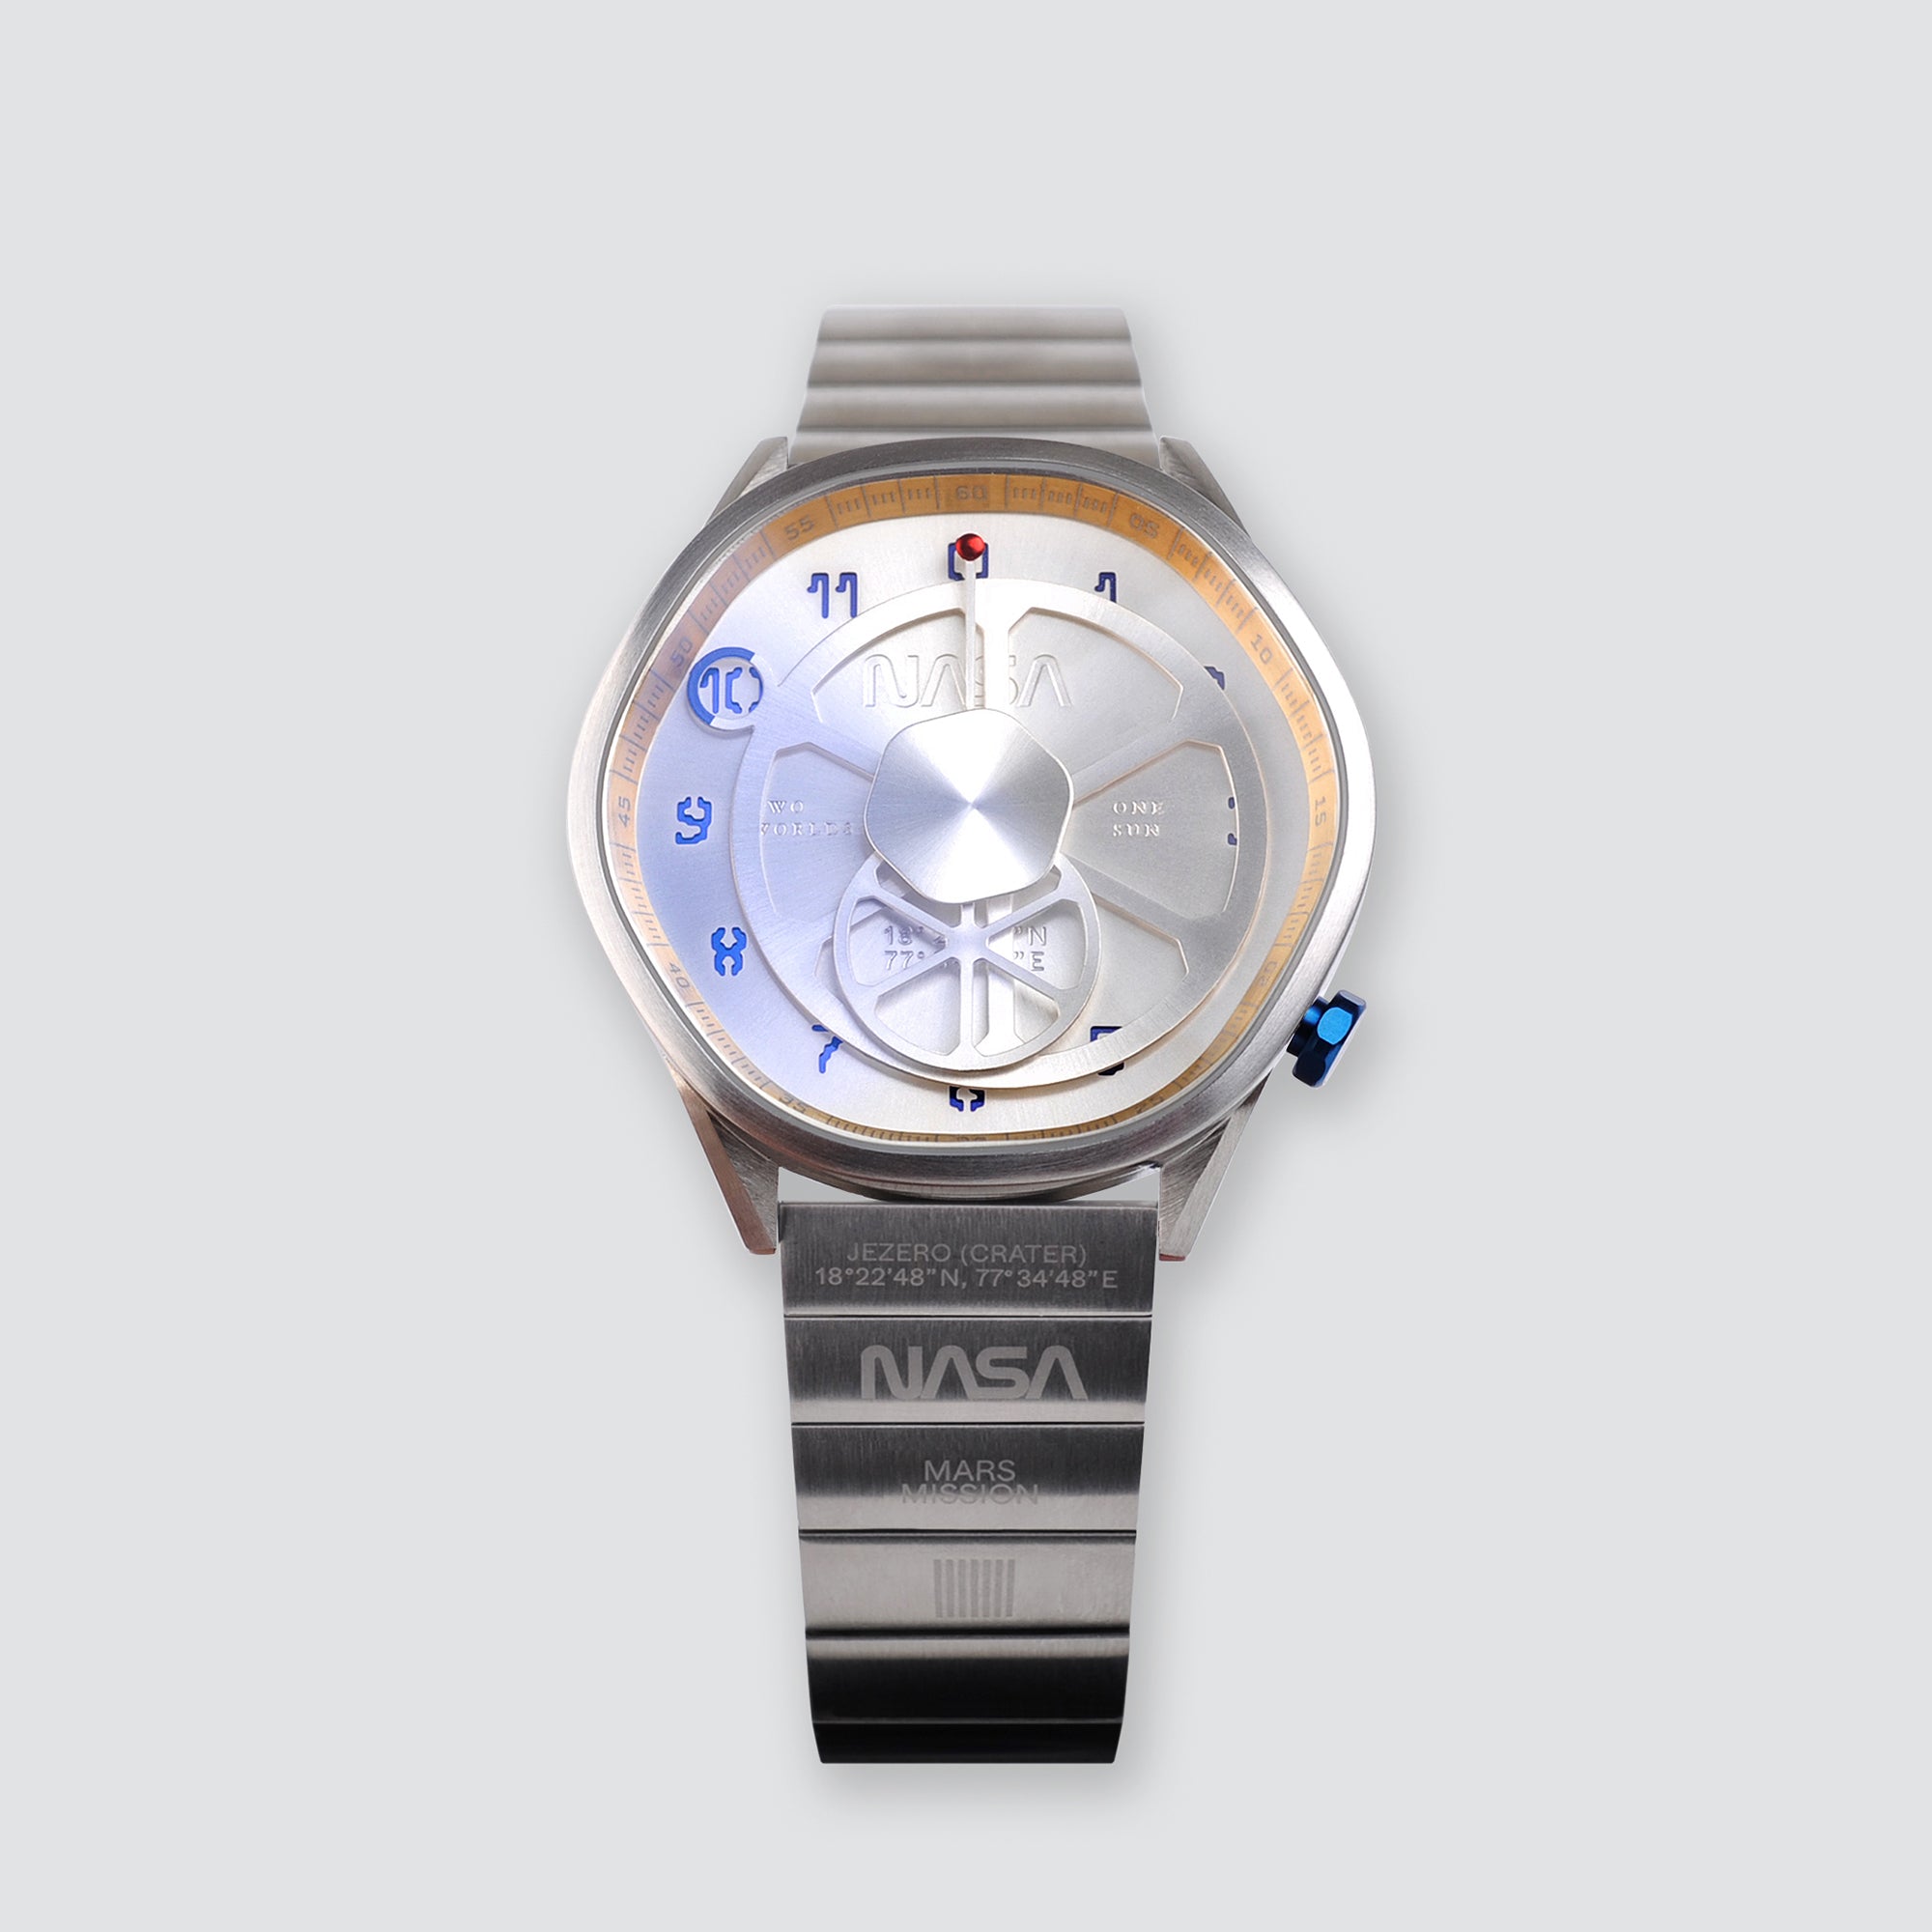 The Mars Time, a watch inspired by Nasa's Perseverance Rover’s landing site Jezero Crater and designed by Anicorn Watches, placed on a white background. View 1